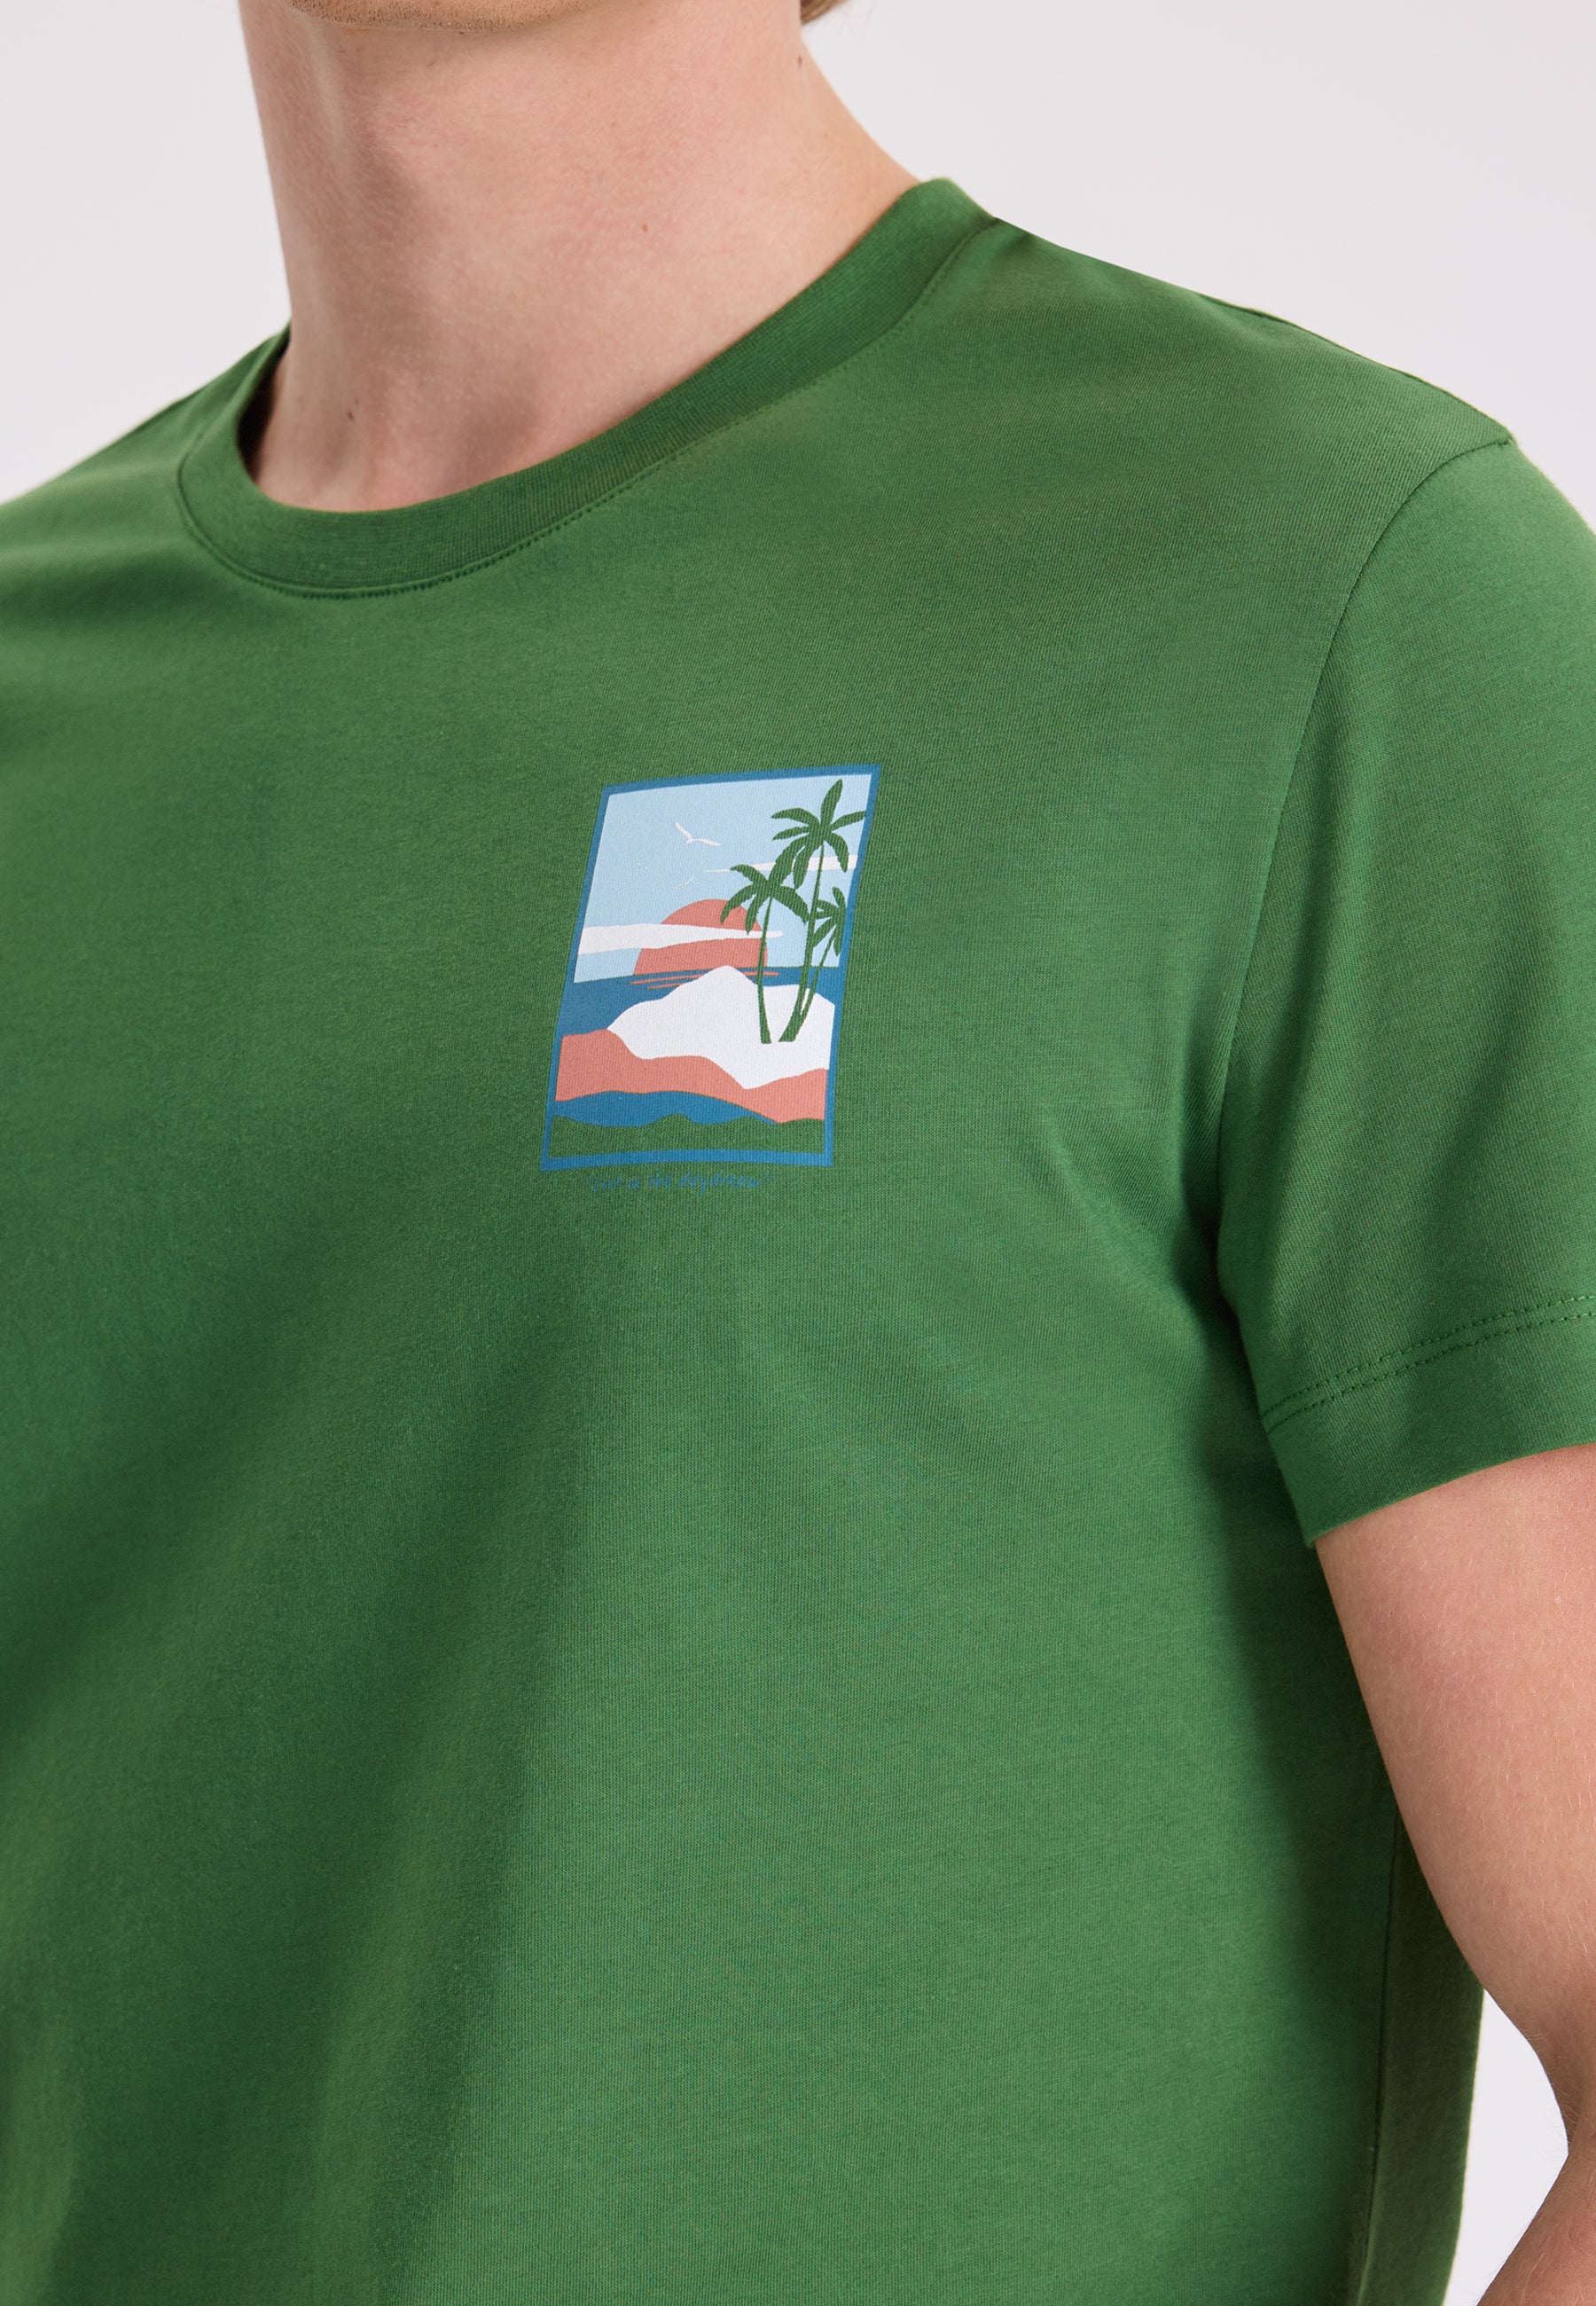 WMBACK SUNSET TEE in Piquant Green